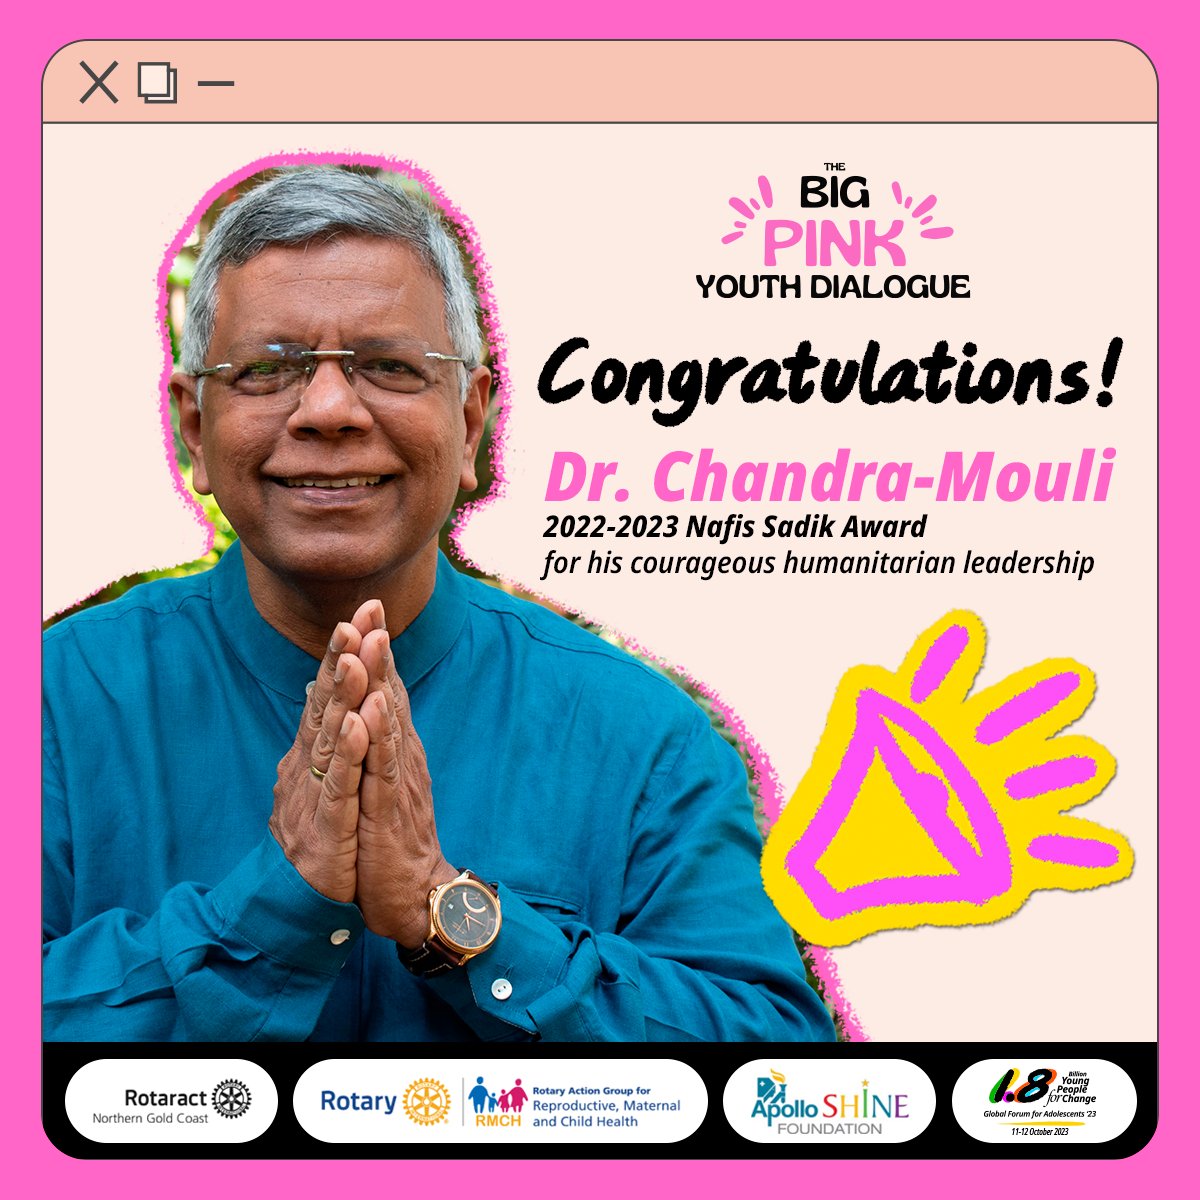 🎉 Congratulations to @ChandraMouliWHO @WHO on receiving the prestigious 2022-2023 Nafis Sadik Award from the Rotary Action Group! This well-deserved recognition celebrates courageous humanitarian leadership in reproductive, maternal, and child health. Read more…